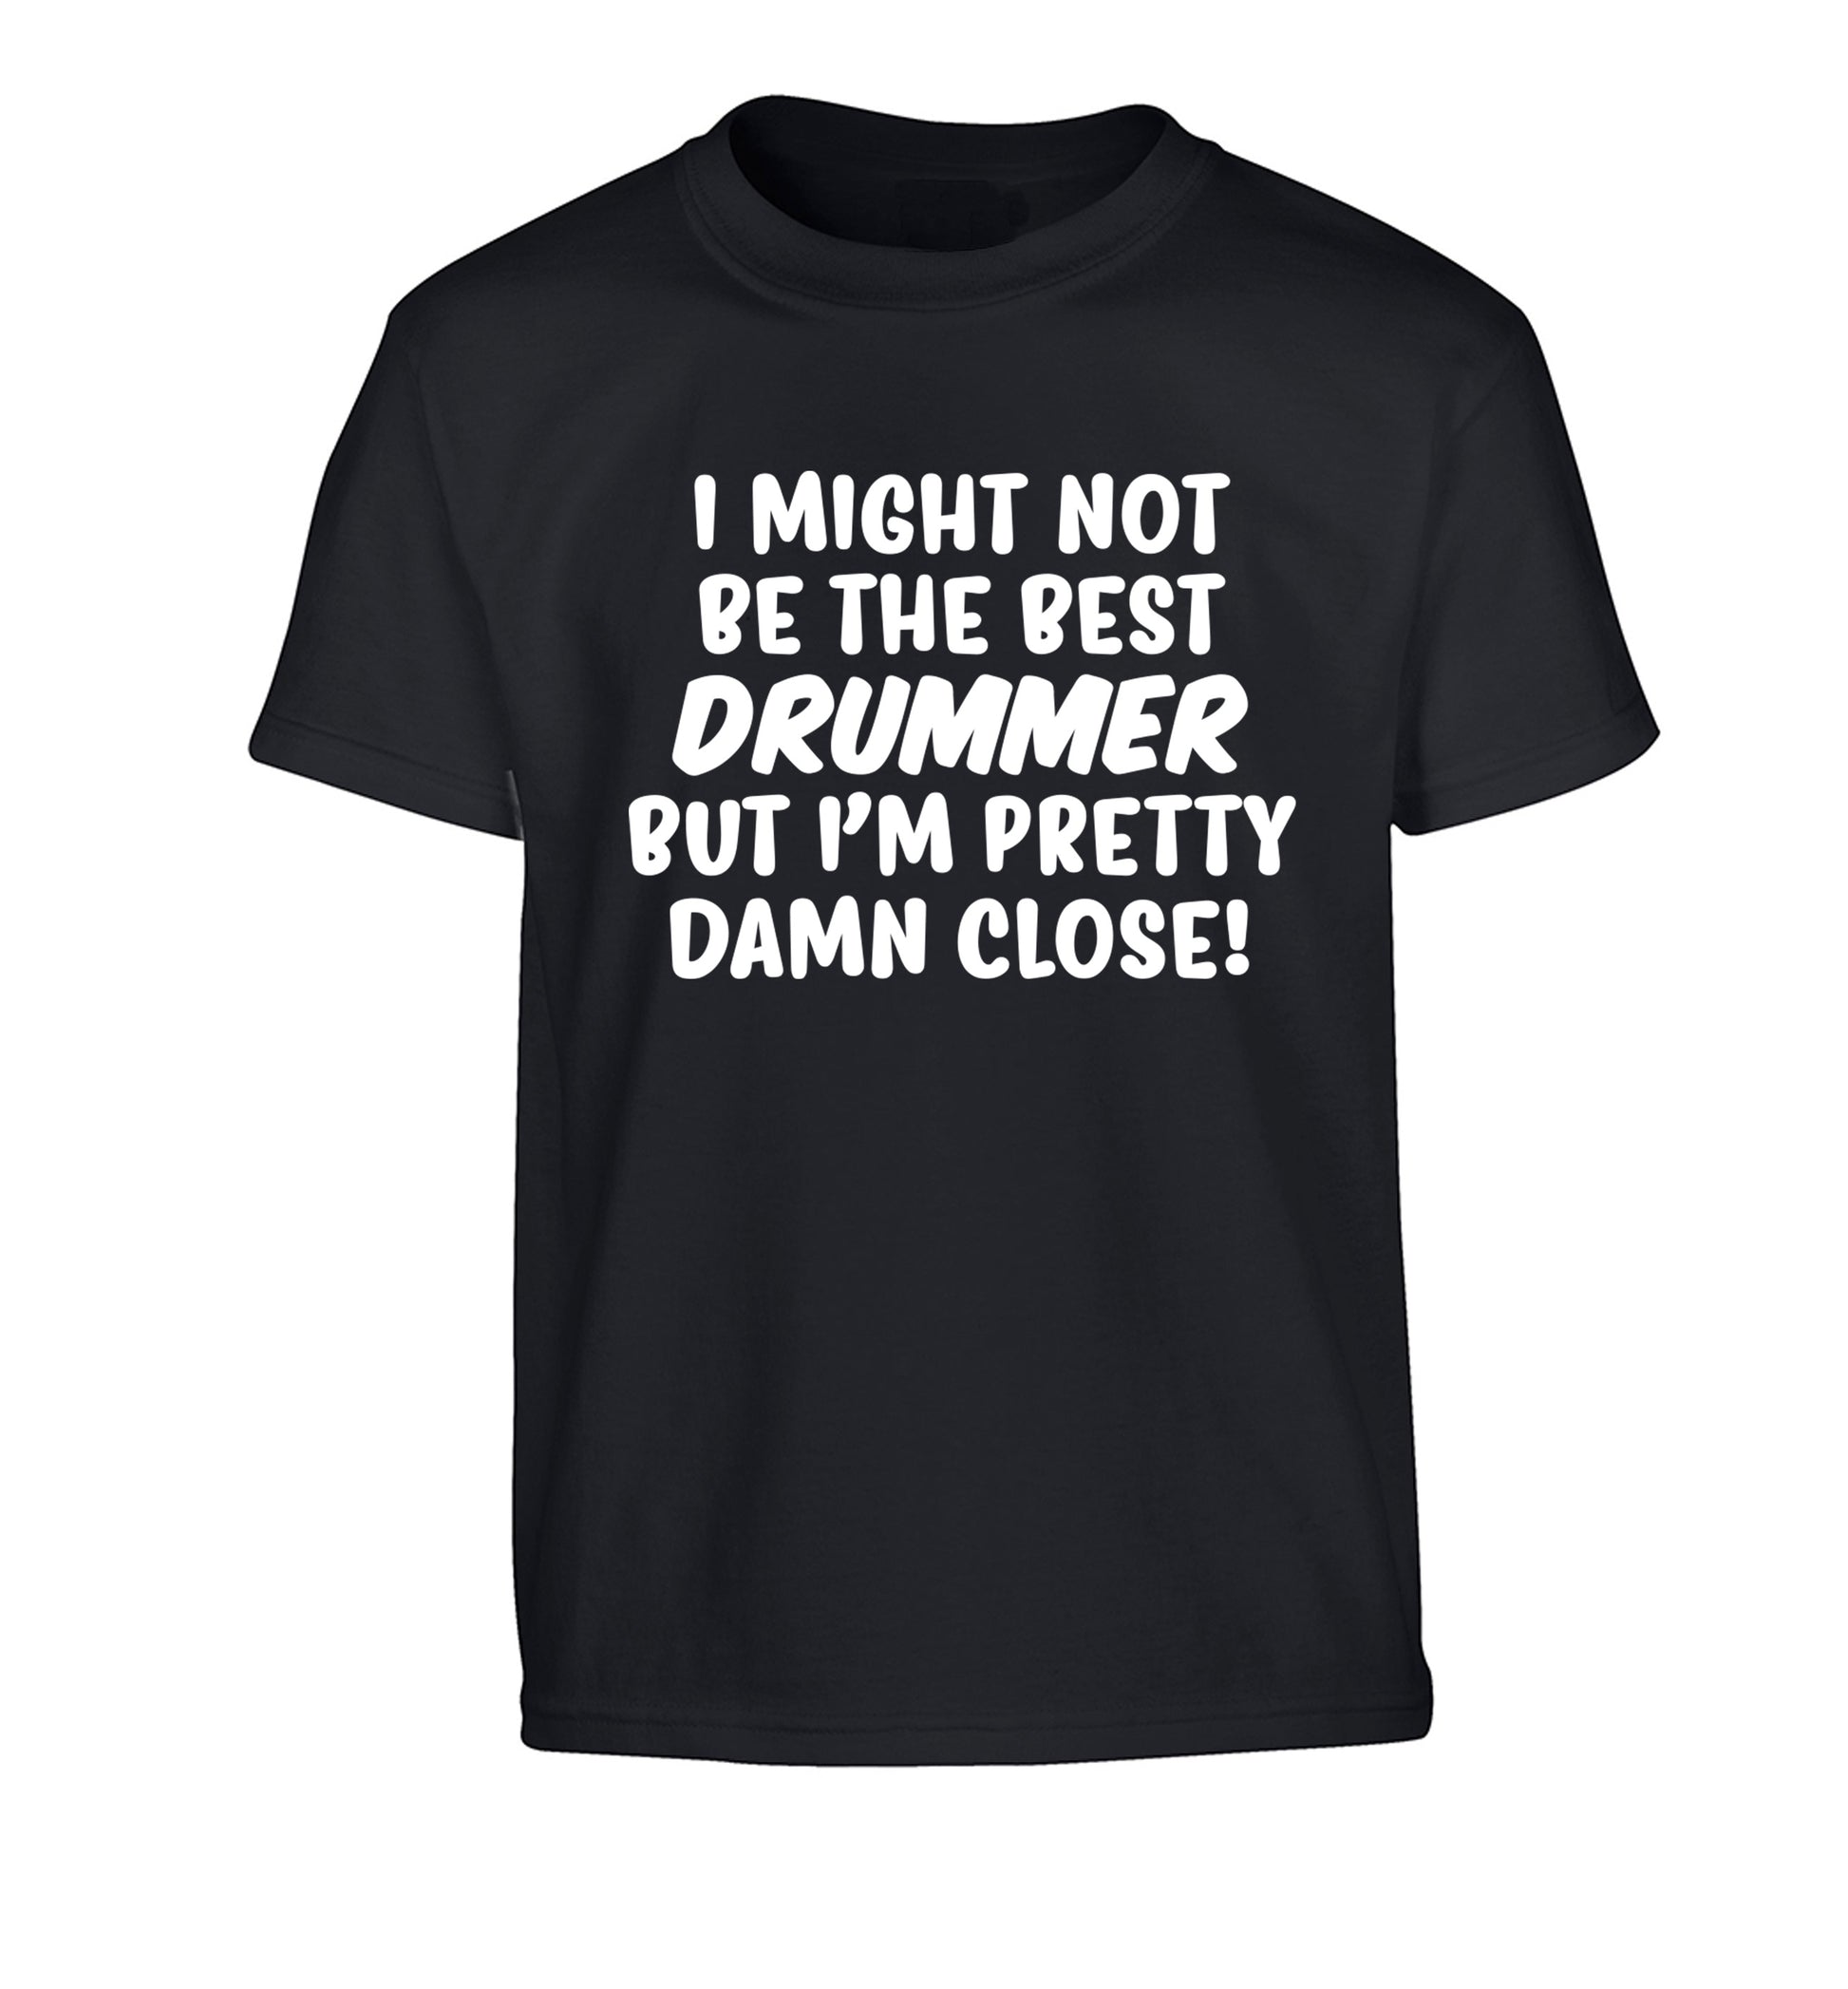 I might not be the best drummer but I'm pretty close! Children's black Tshirt 12-14 Years